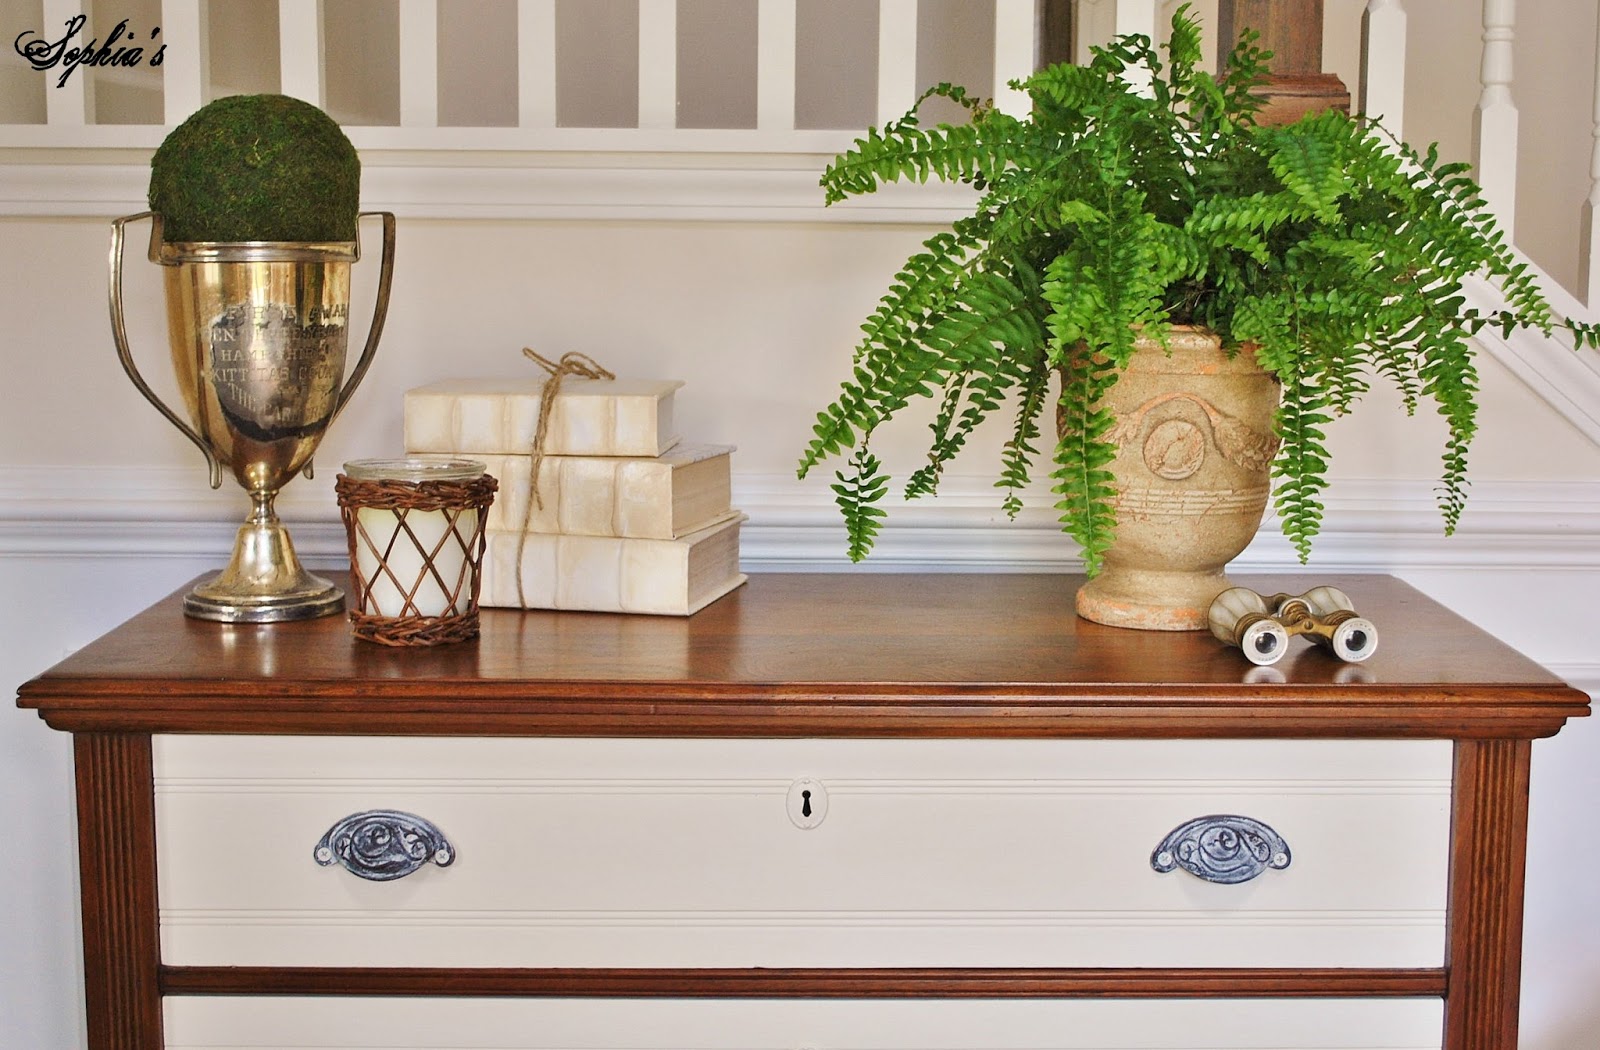 Sophia's: Two-toned Dresser and Kitchen Scale Dining Table